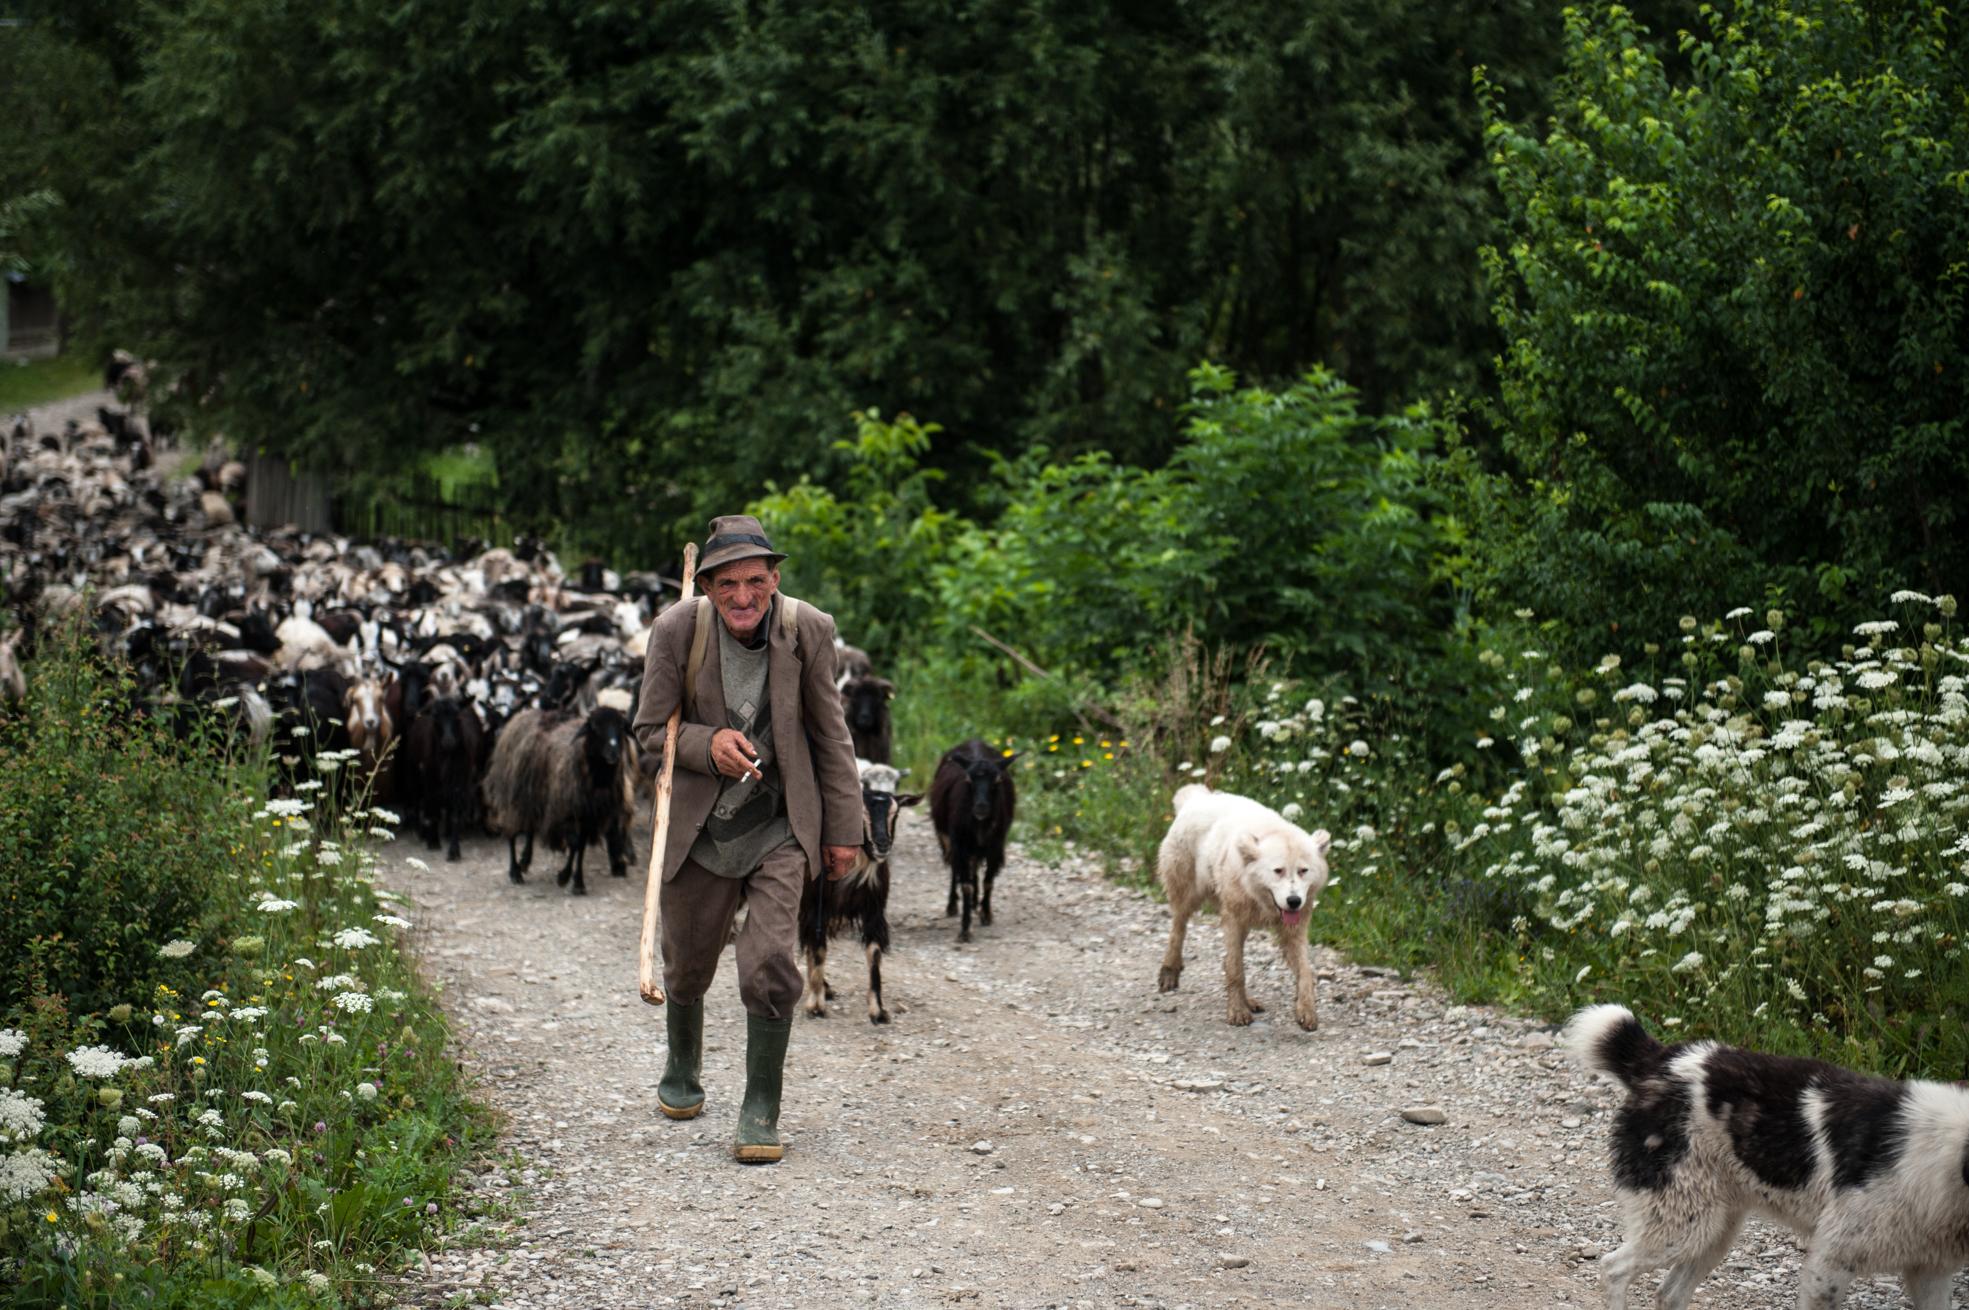 A day in the village of the missing generation - Romania